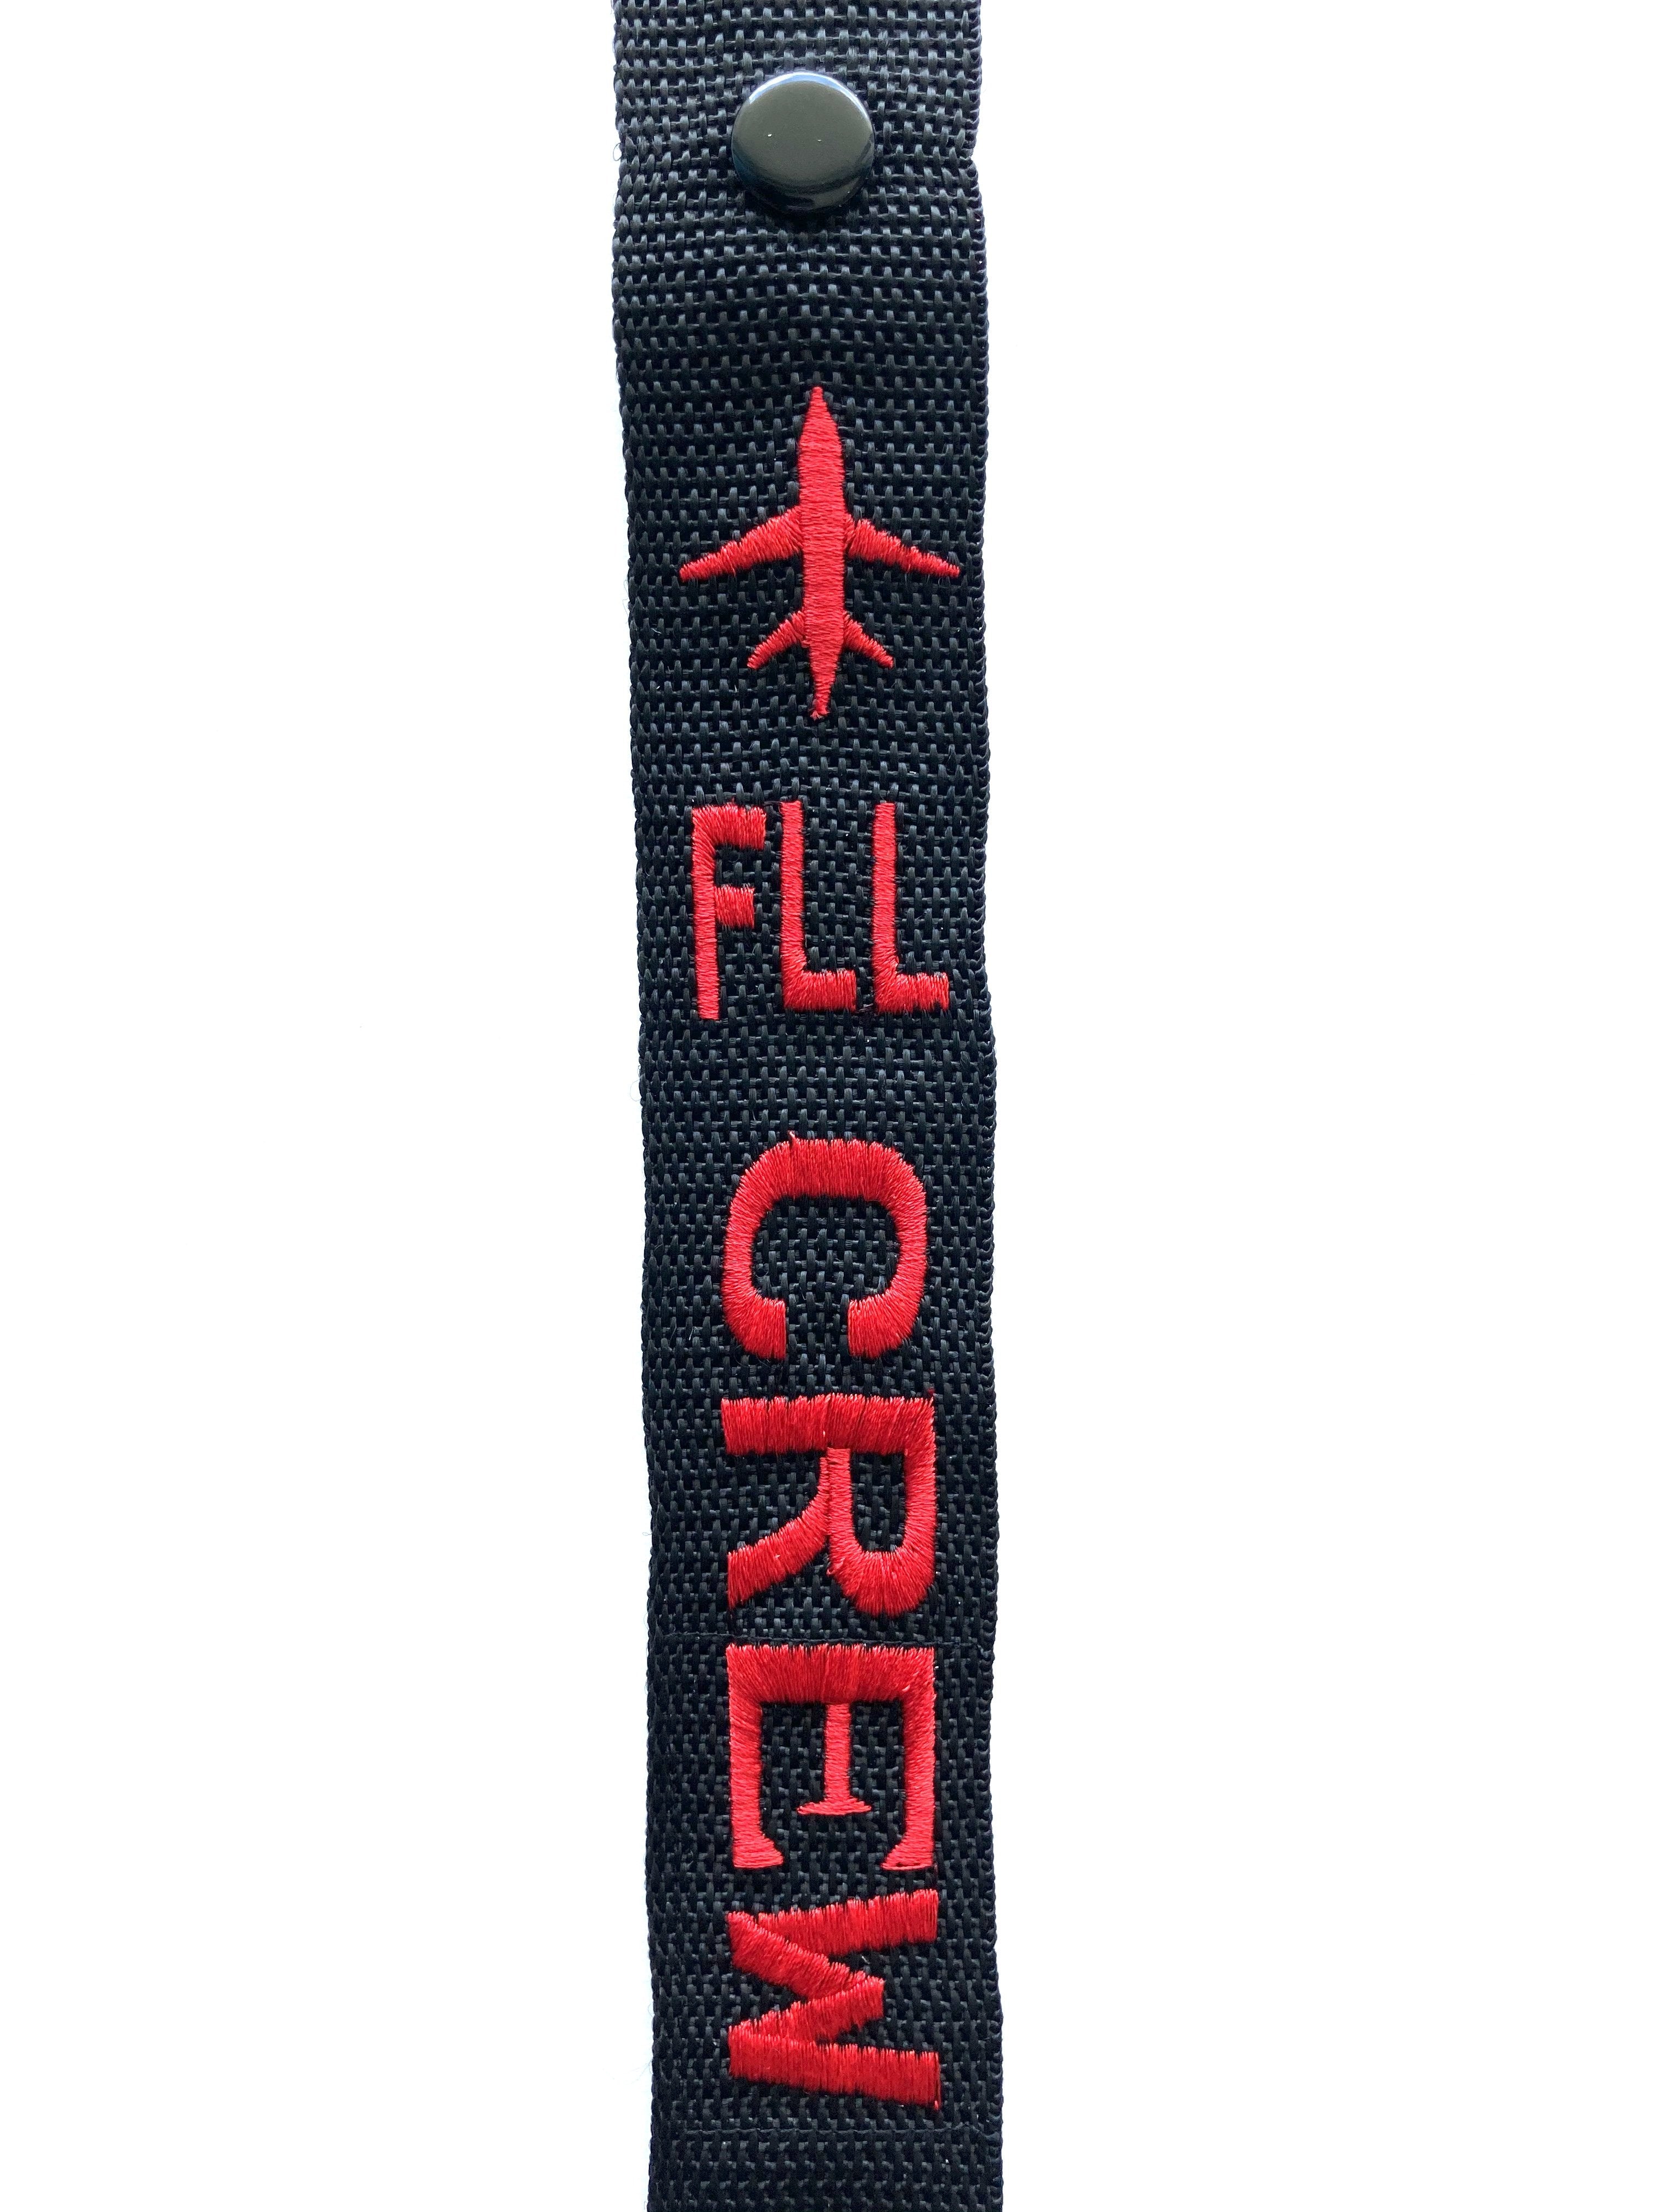 CREW Luggage Tag - FLL Red